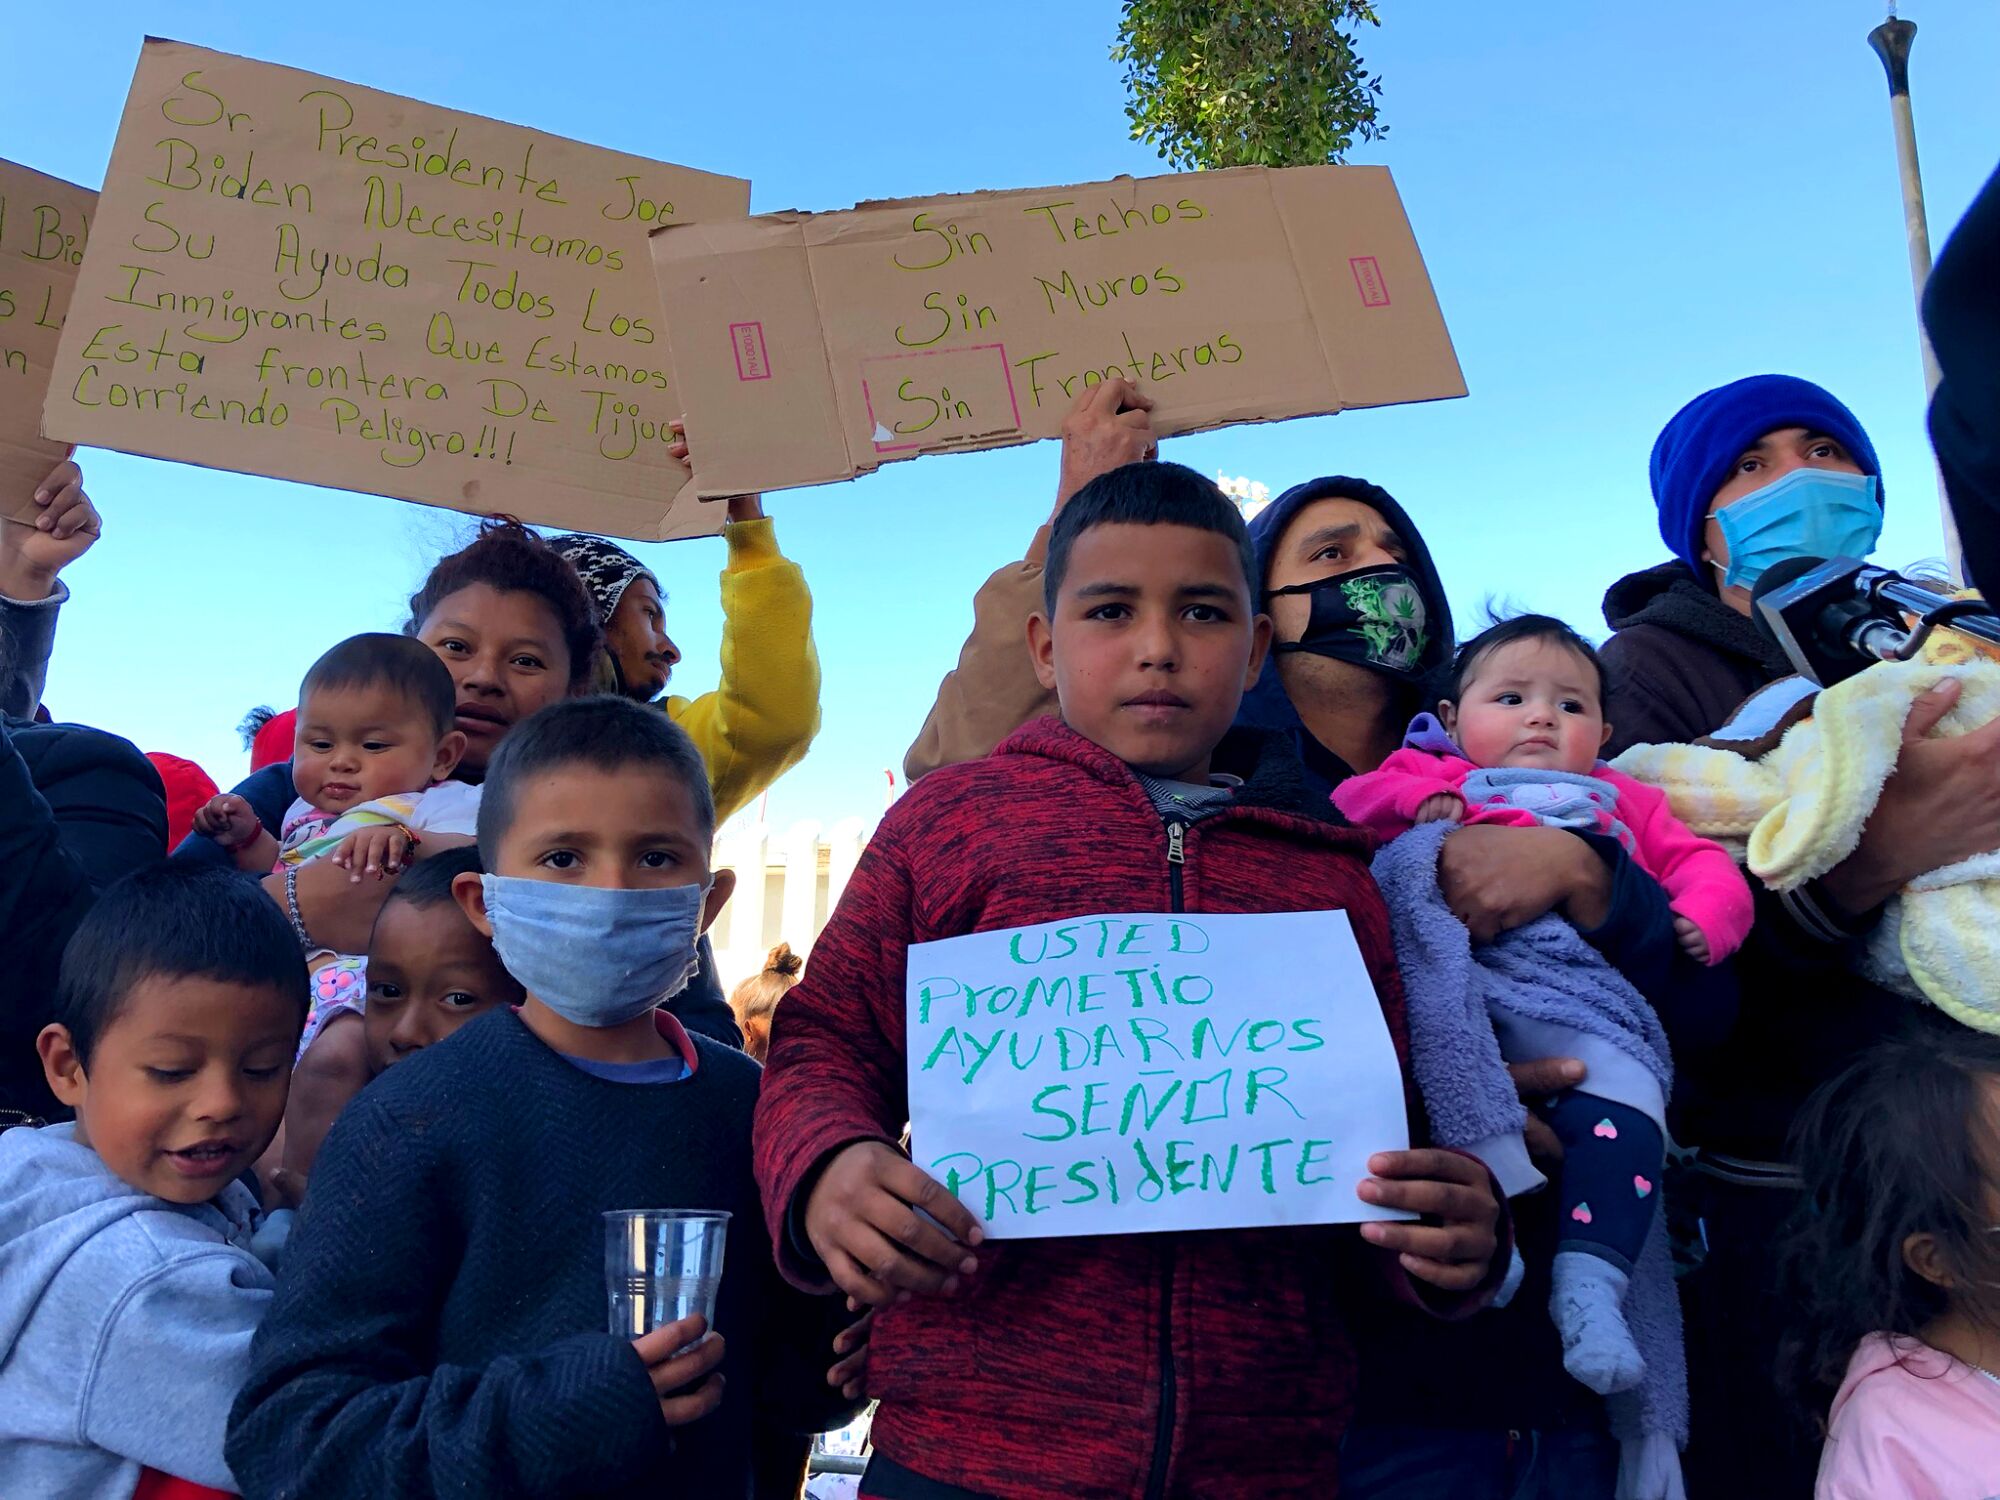 Asylum seekers waiting in Tijuana hold signs asking the United States for help.